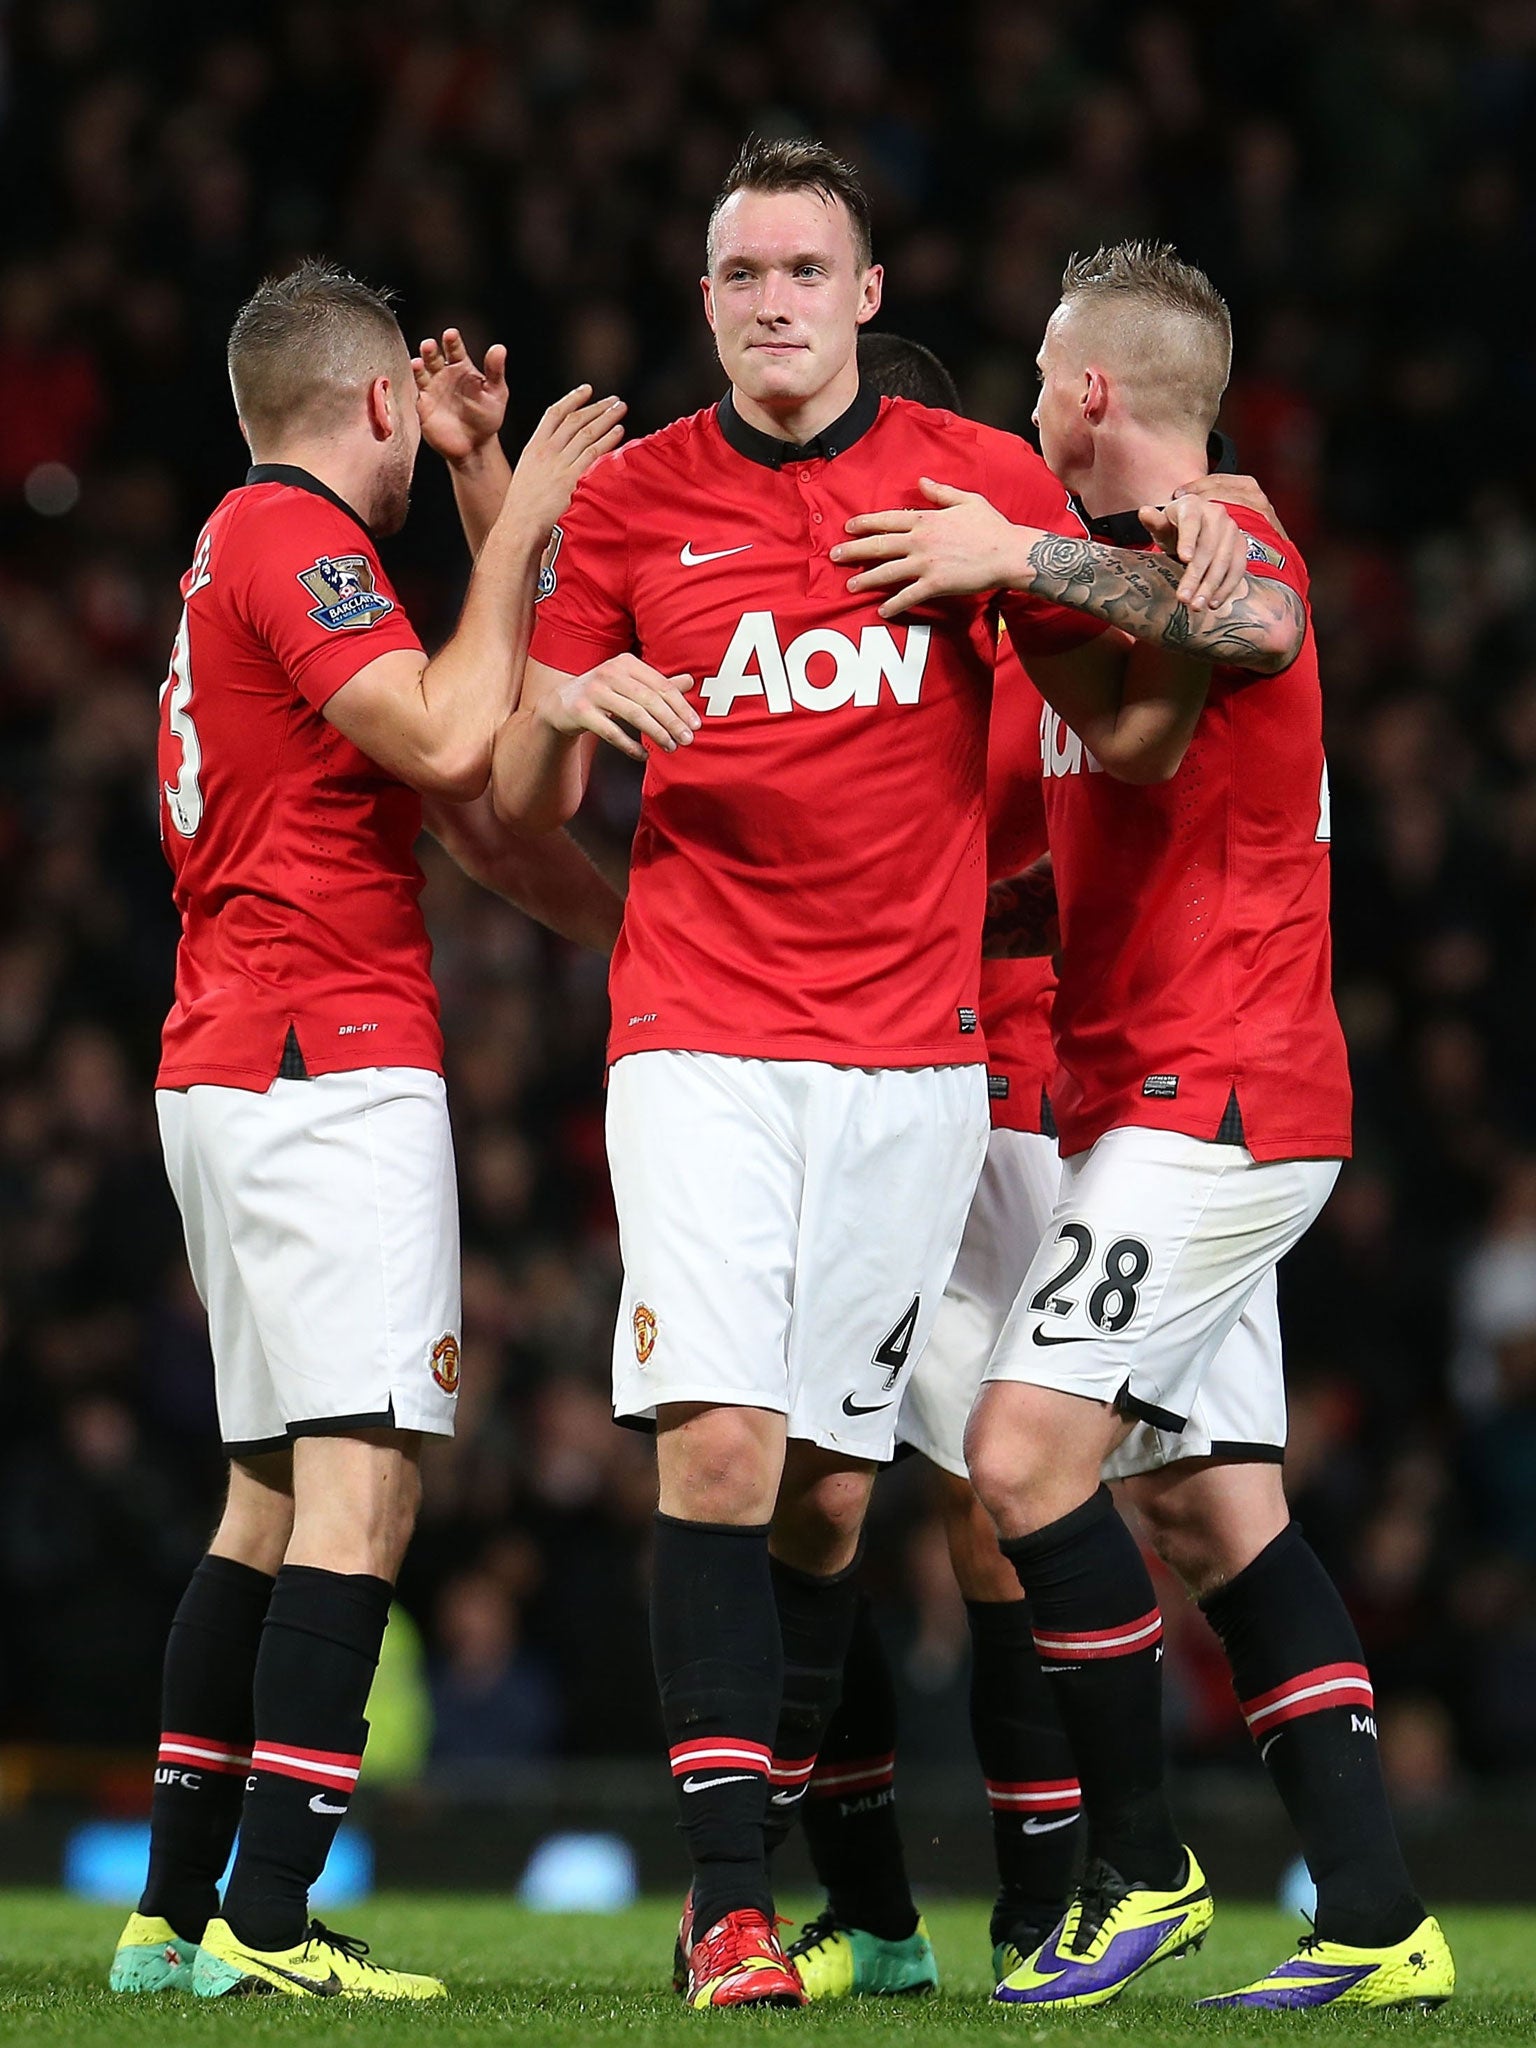 Manchester United gained momentum in the league with victory over Arsenal